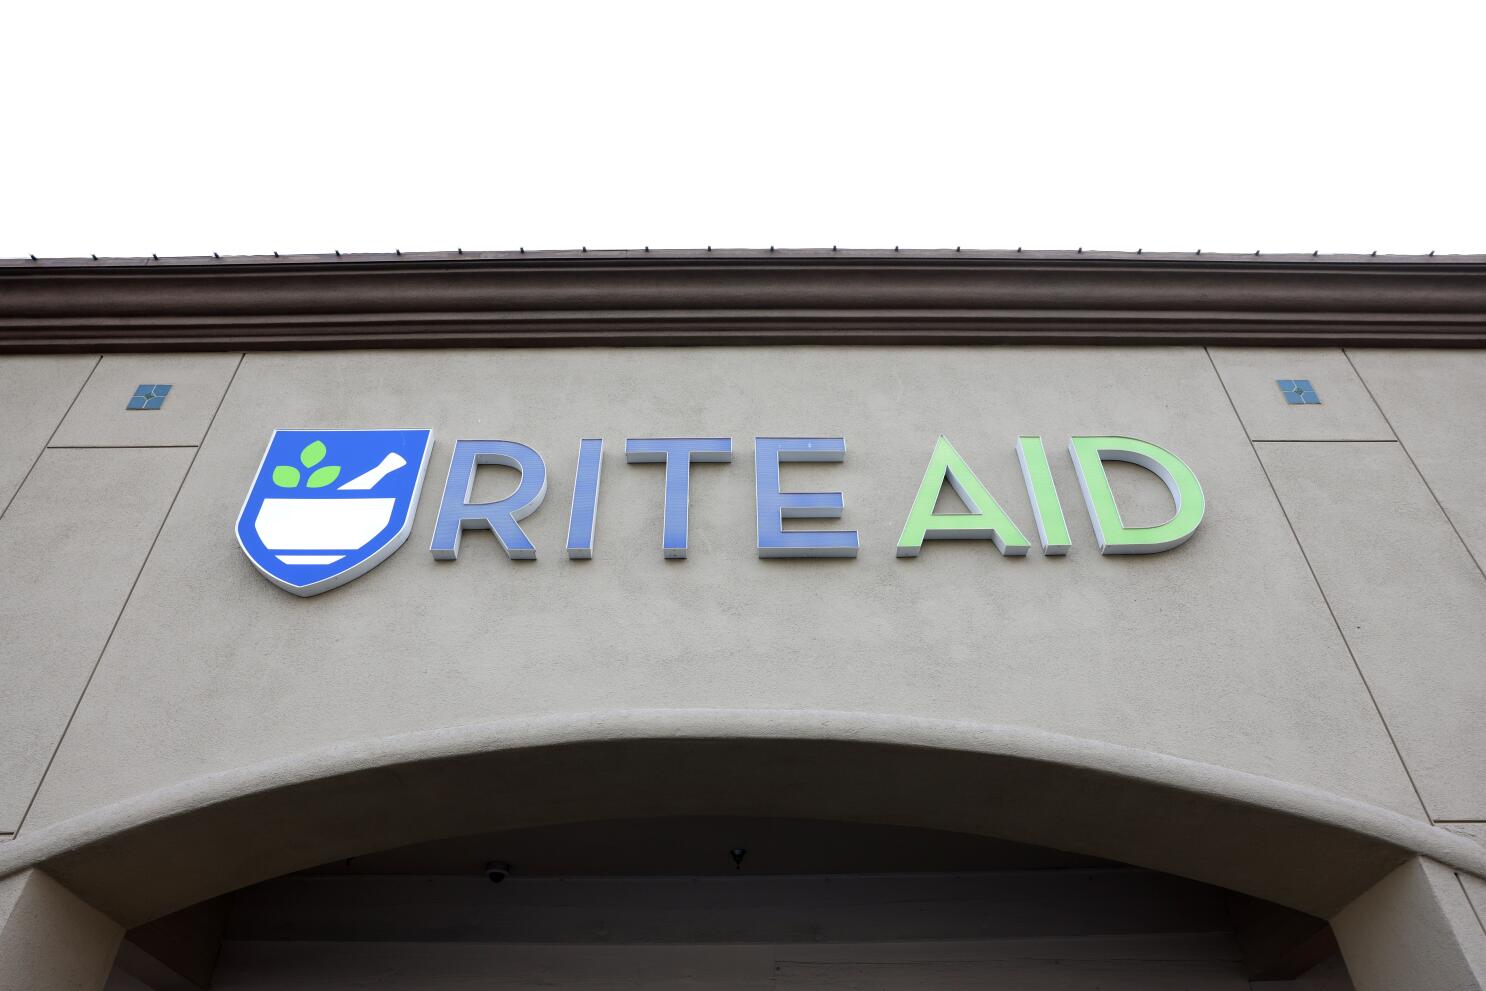 Rite Aid files for bankruptcy, will shut some stores - Los Angeles Times